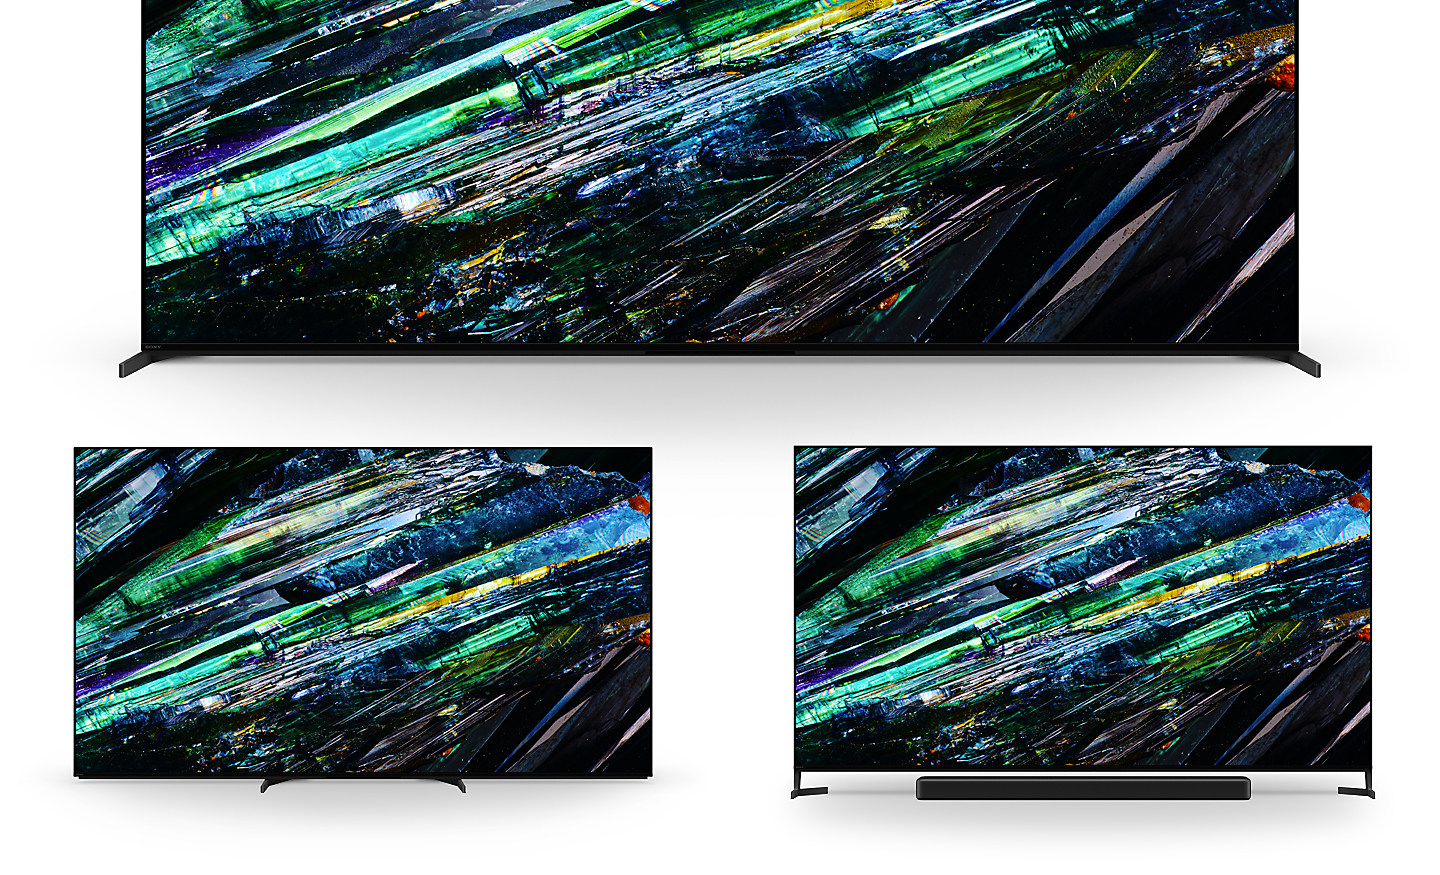 Image of three A95L Series BRAVIA TVs showing stand in standard setting, narrow setting and soundbar setting